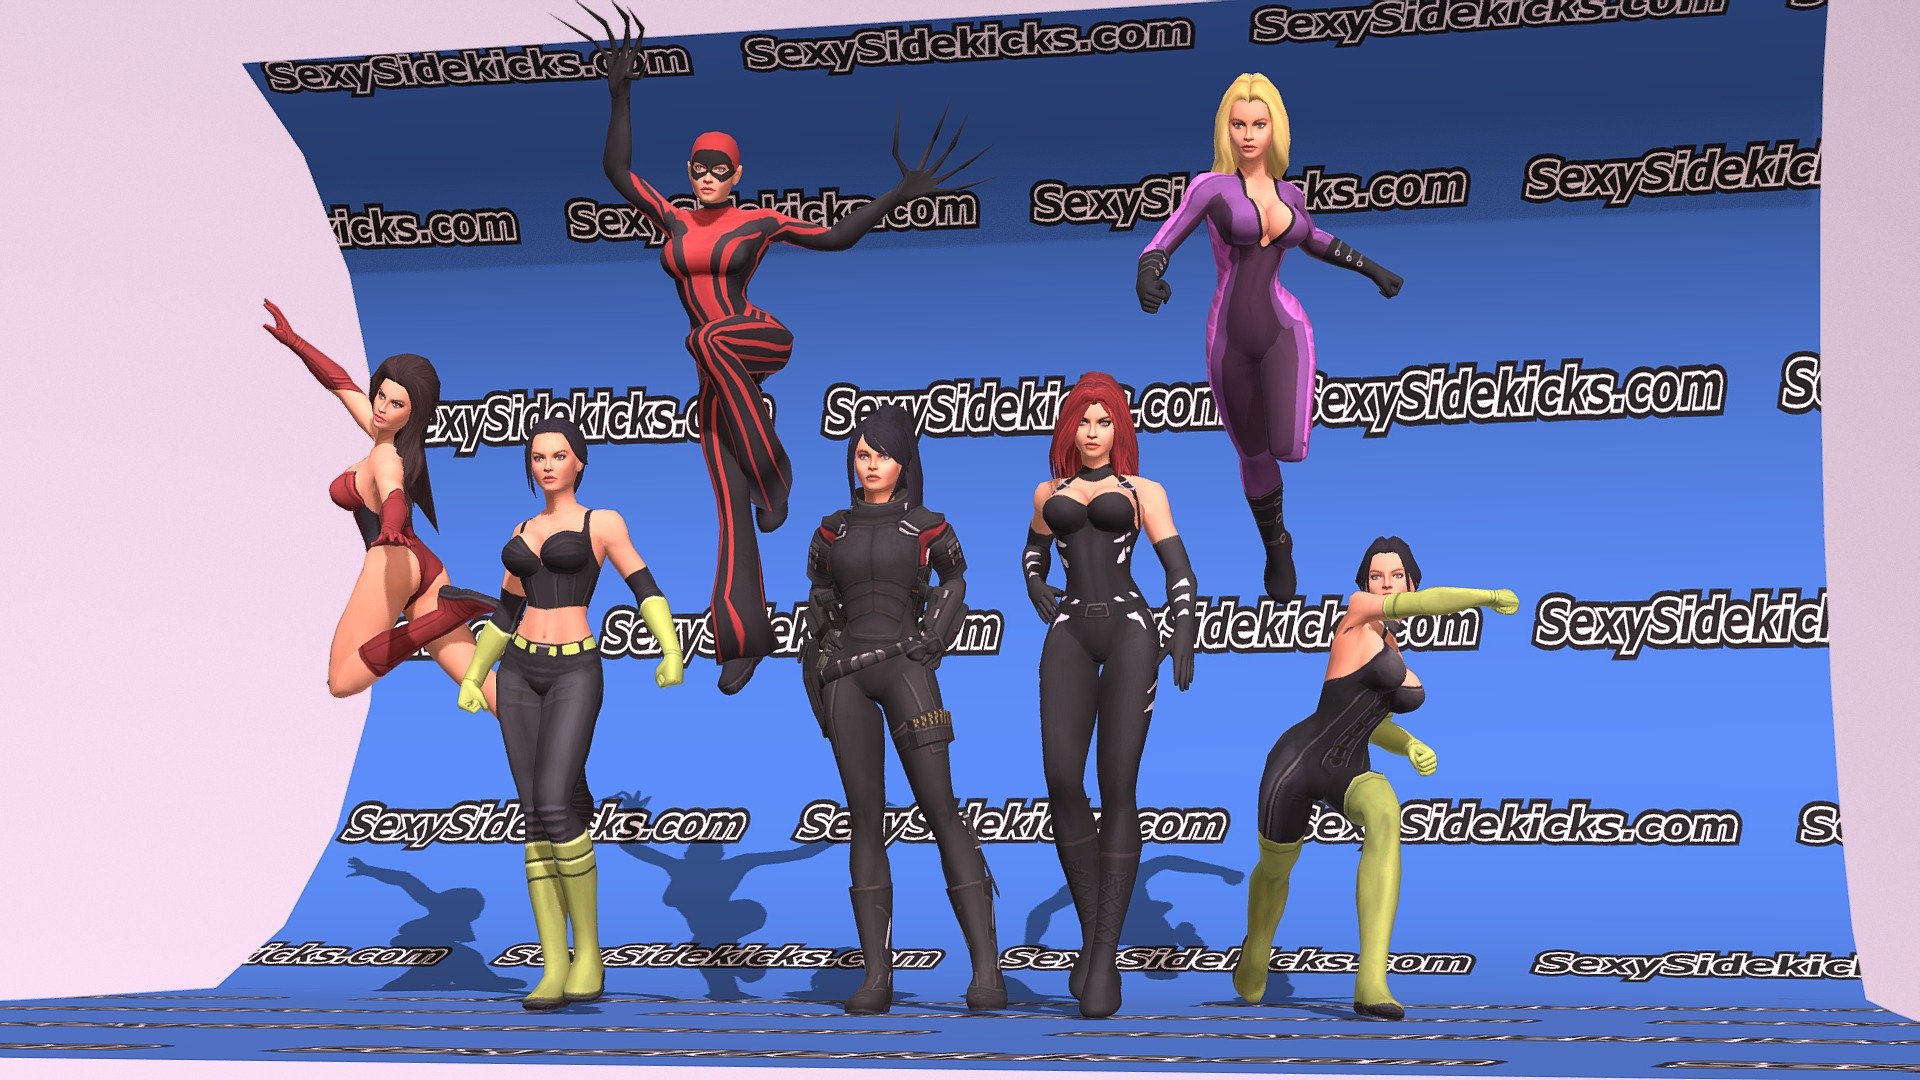 The Superhero Construction Kit Modern Females1-8 includes:
        42 female superhero animations
        8 female outfits
        30 female hairstyles
        PSD layers for changing haircolor, eye color, faces, skin color
        PSD layers for outfits, so you can mix and match
        NOTE:ModernF8, the black one with all the gear&hellip;can only mix and match faces and hairstyles, her body uv's are way different than the others 3d model